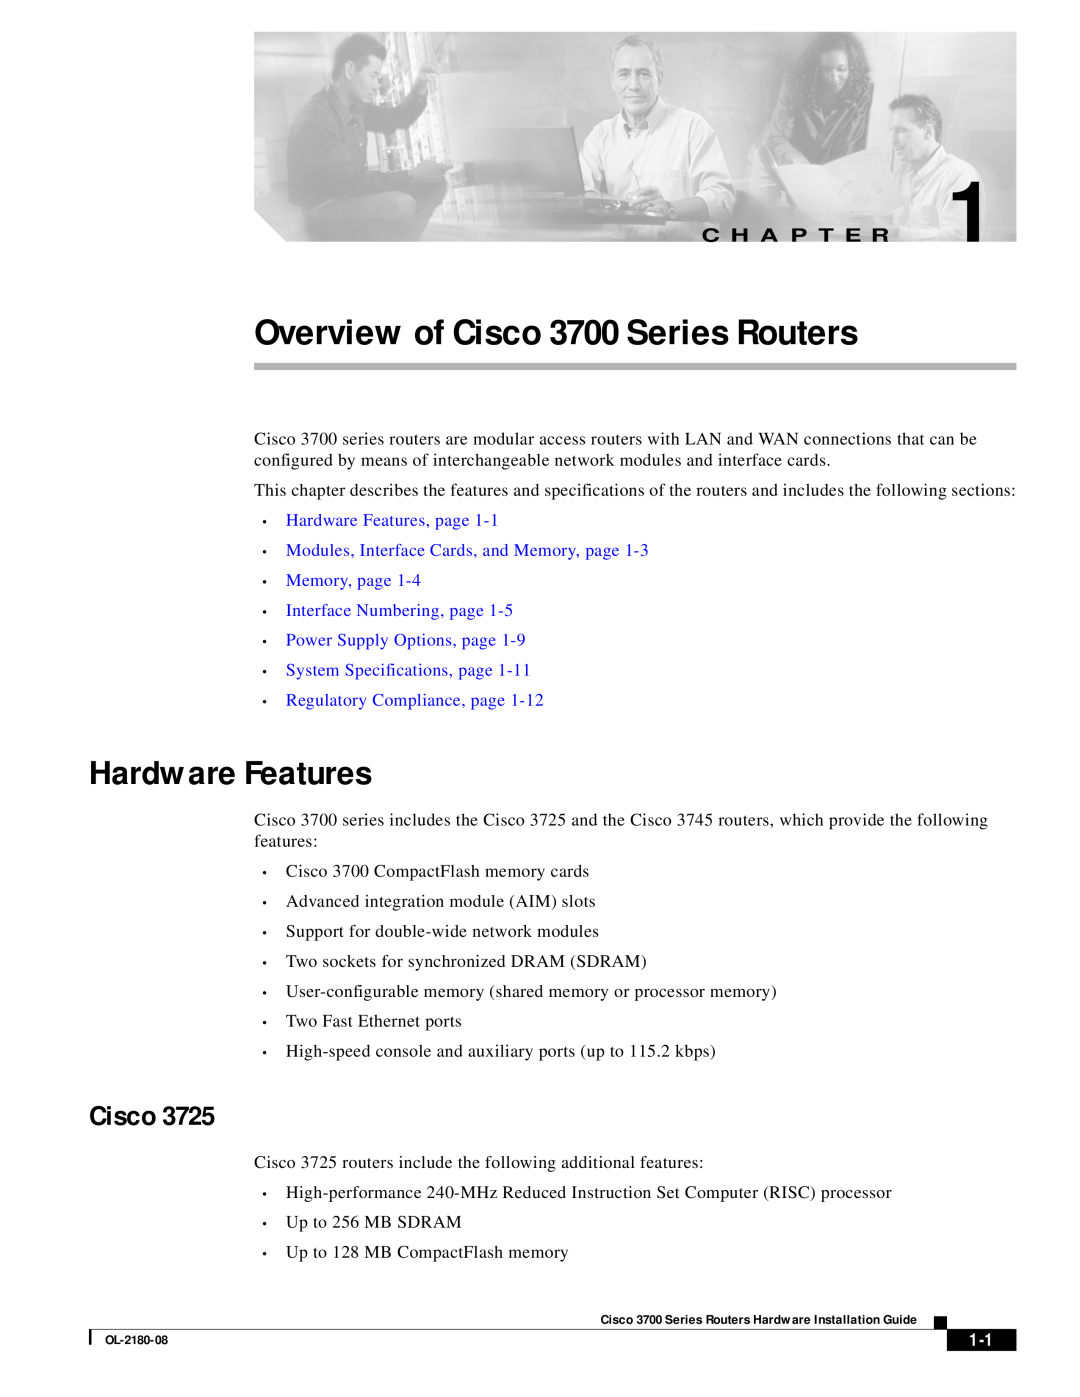 Cisco Systems specifications Hardware Features, Overview of Cisco 3700 Series Routers, C H A P T E R 